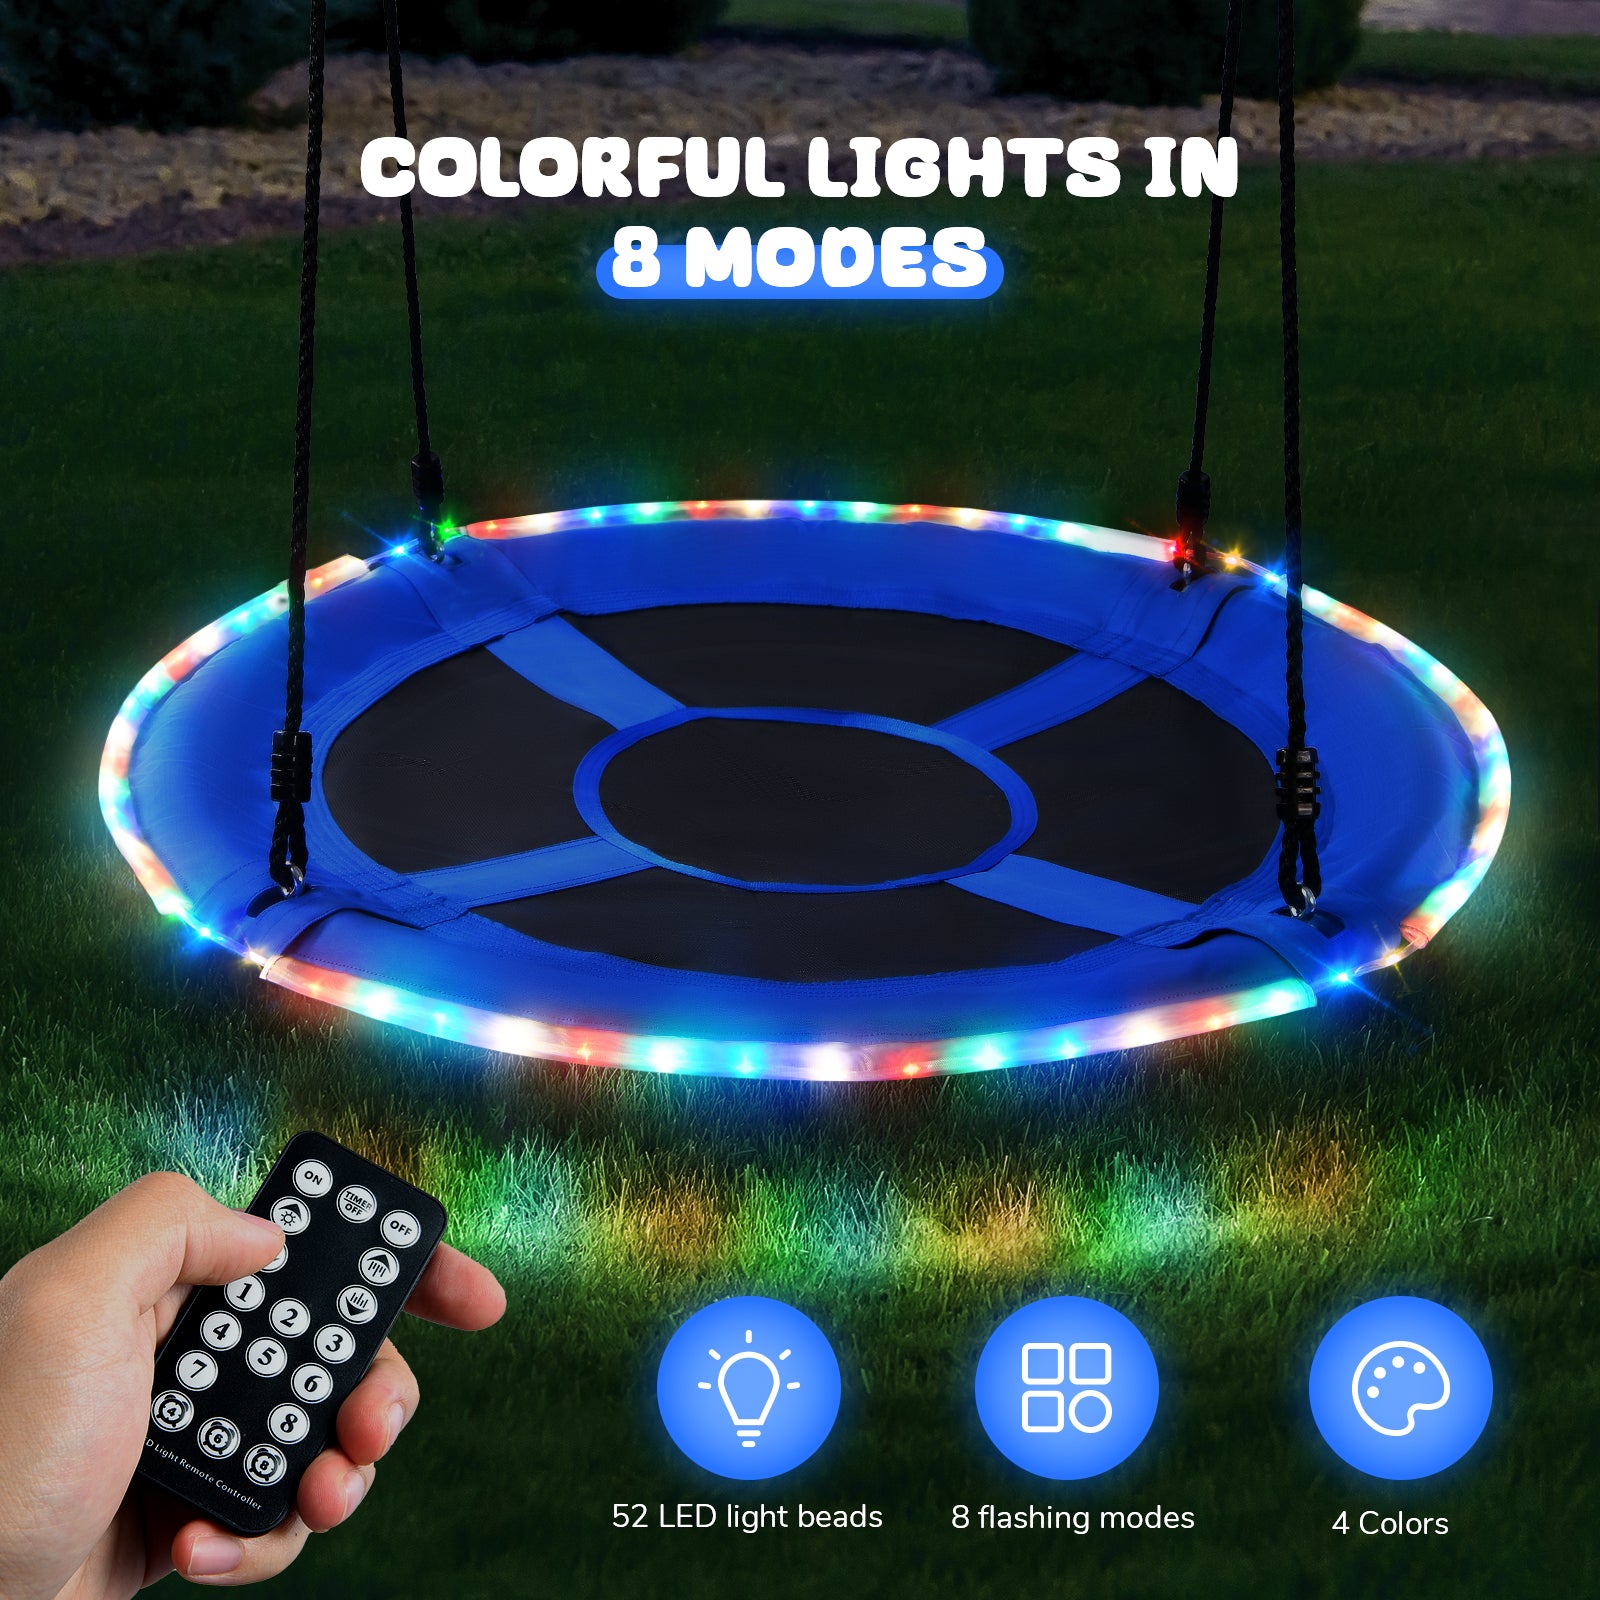 Trekassy 700lbs 40” Saucer Tree Swing with LED Lights for Kids Adults Outdoor-Blue